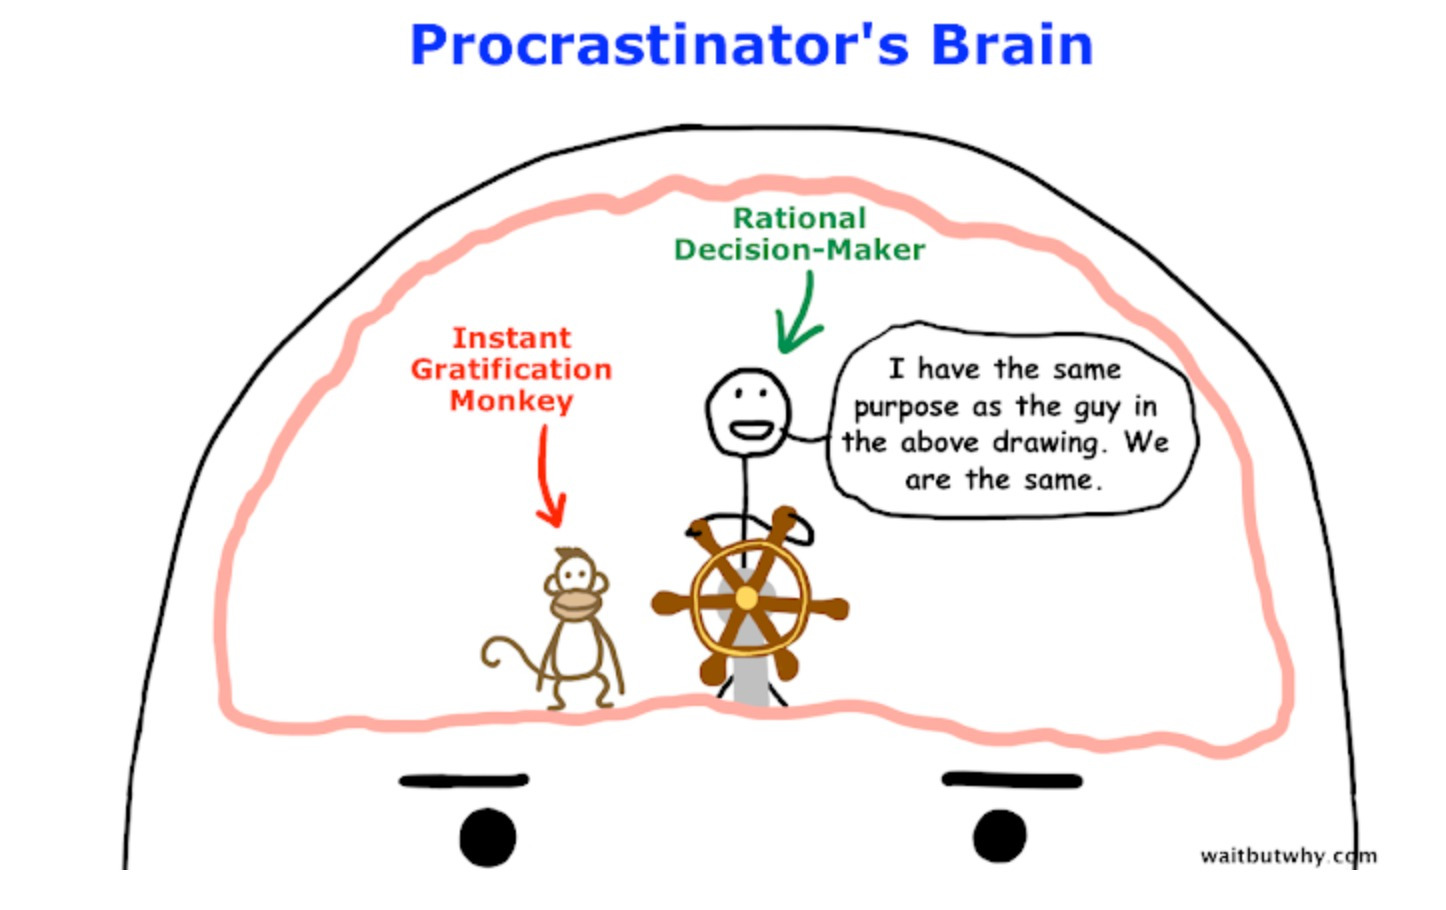 Drawing of inside of procrastinator's brain. Rational Decision-maker Man is "driving" the brain. Instant Gratification Monkey standing nearby